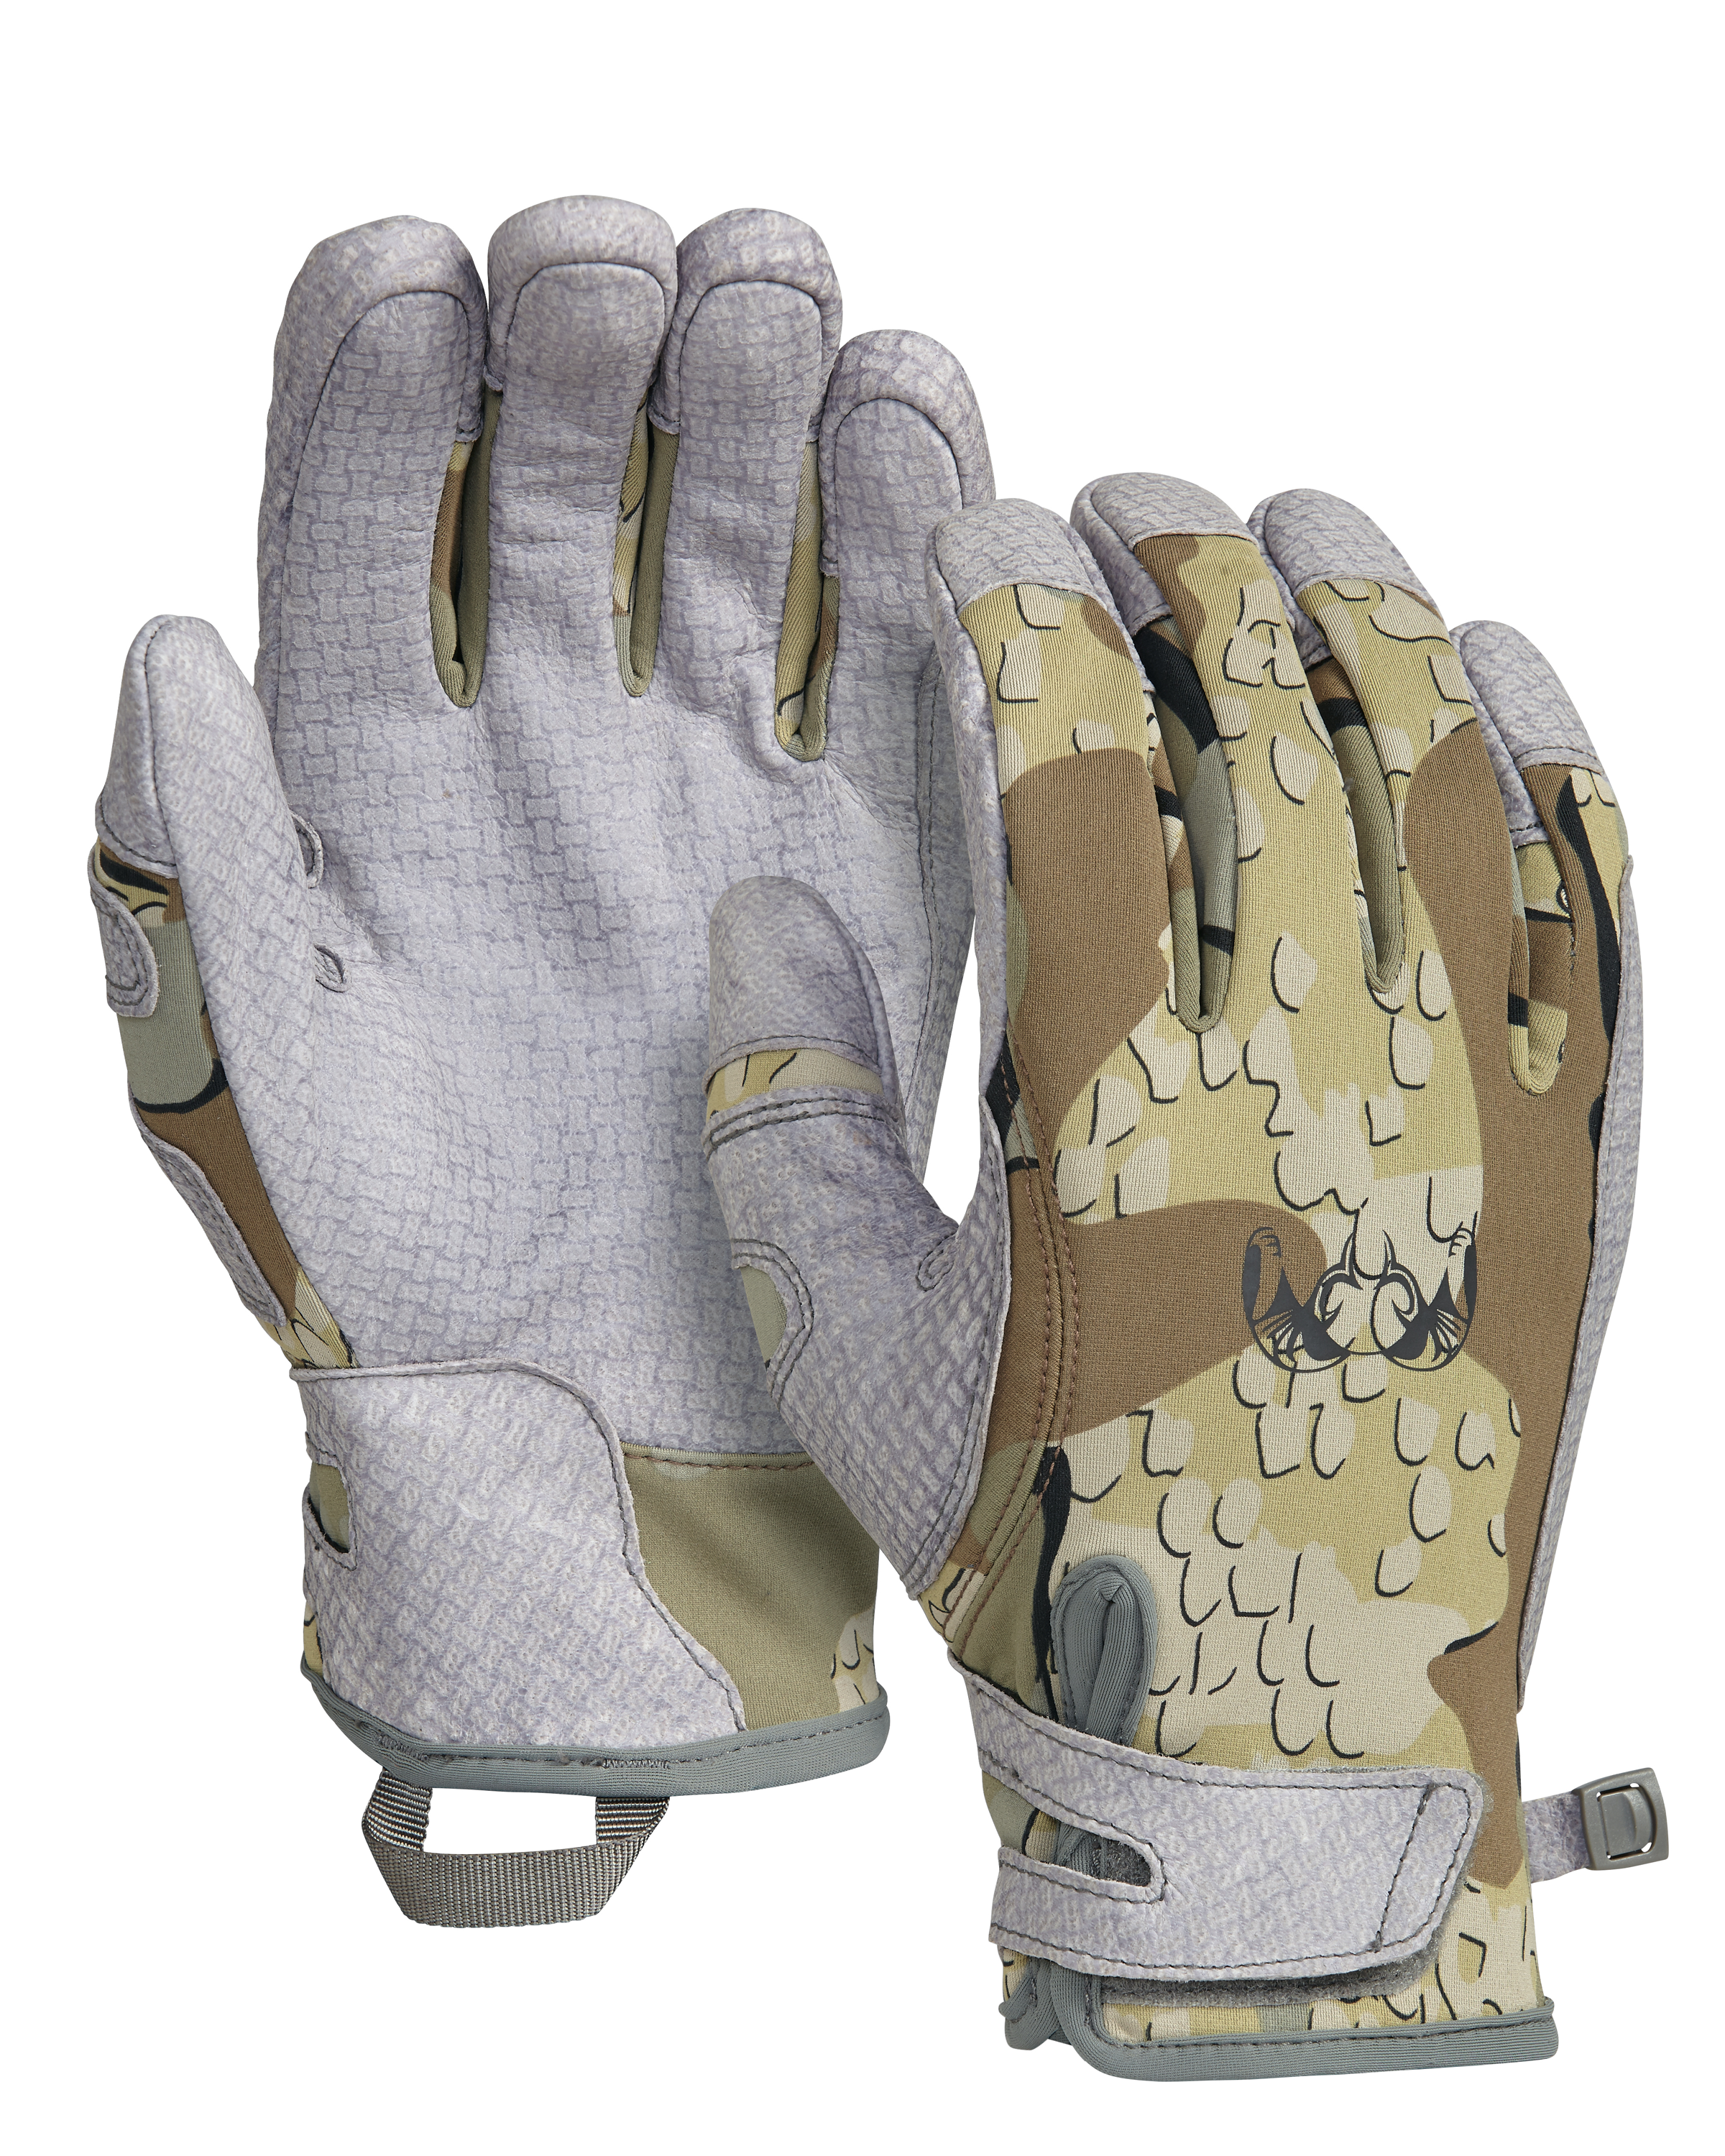 KUIU Guide X Hunting Glove in Valo | Size XL